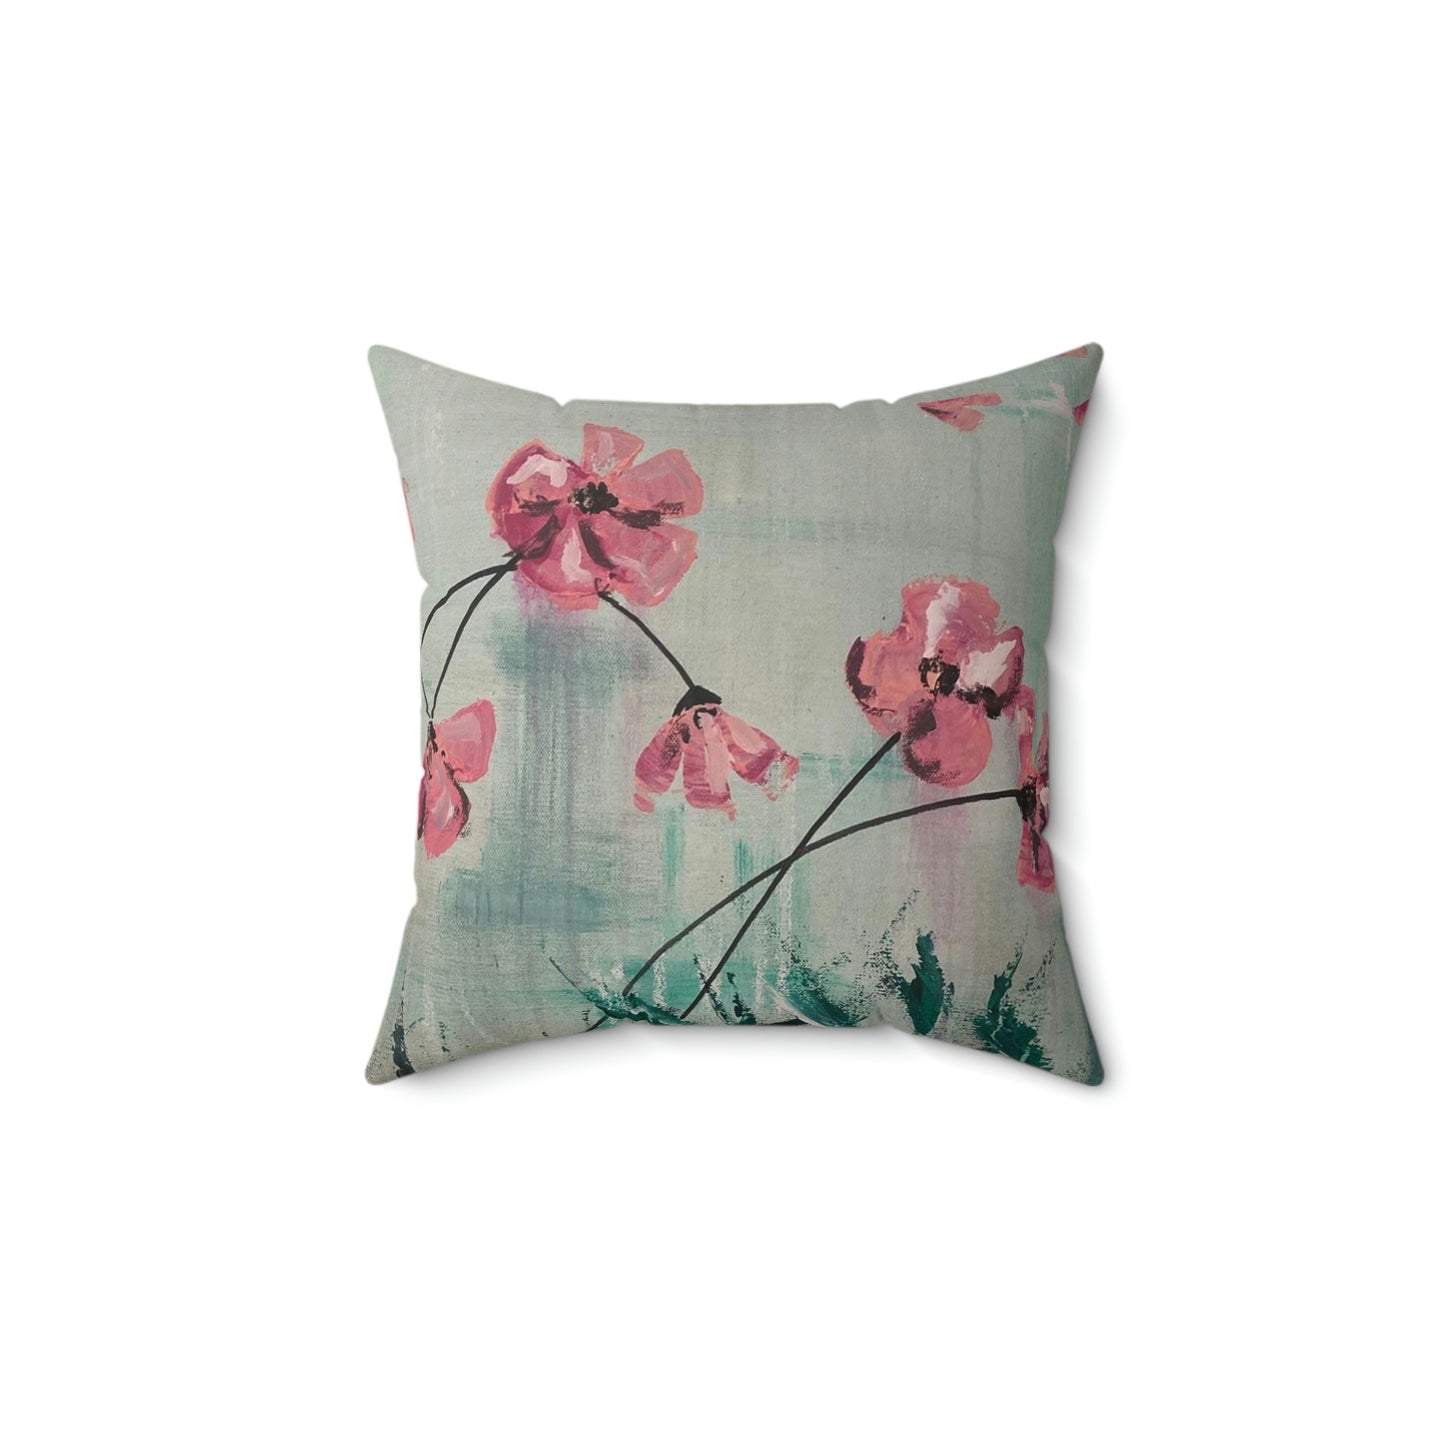 Spun Polyester Square Pillow - Pink Flowers Candice Griffy Original